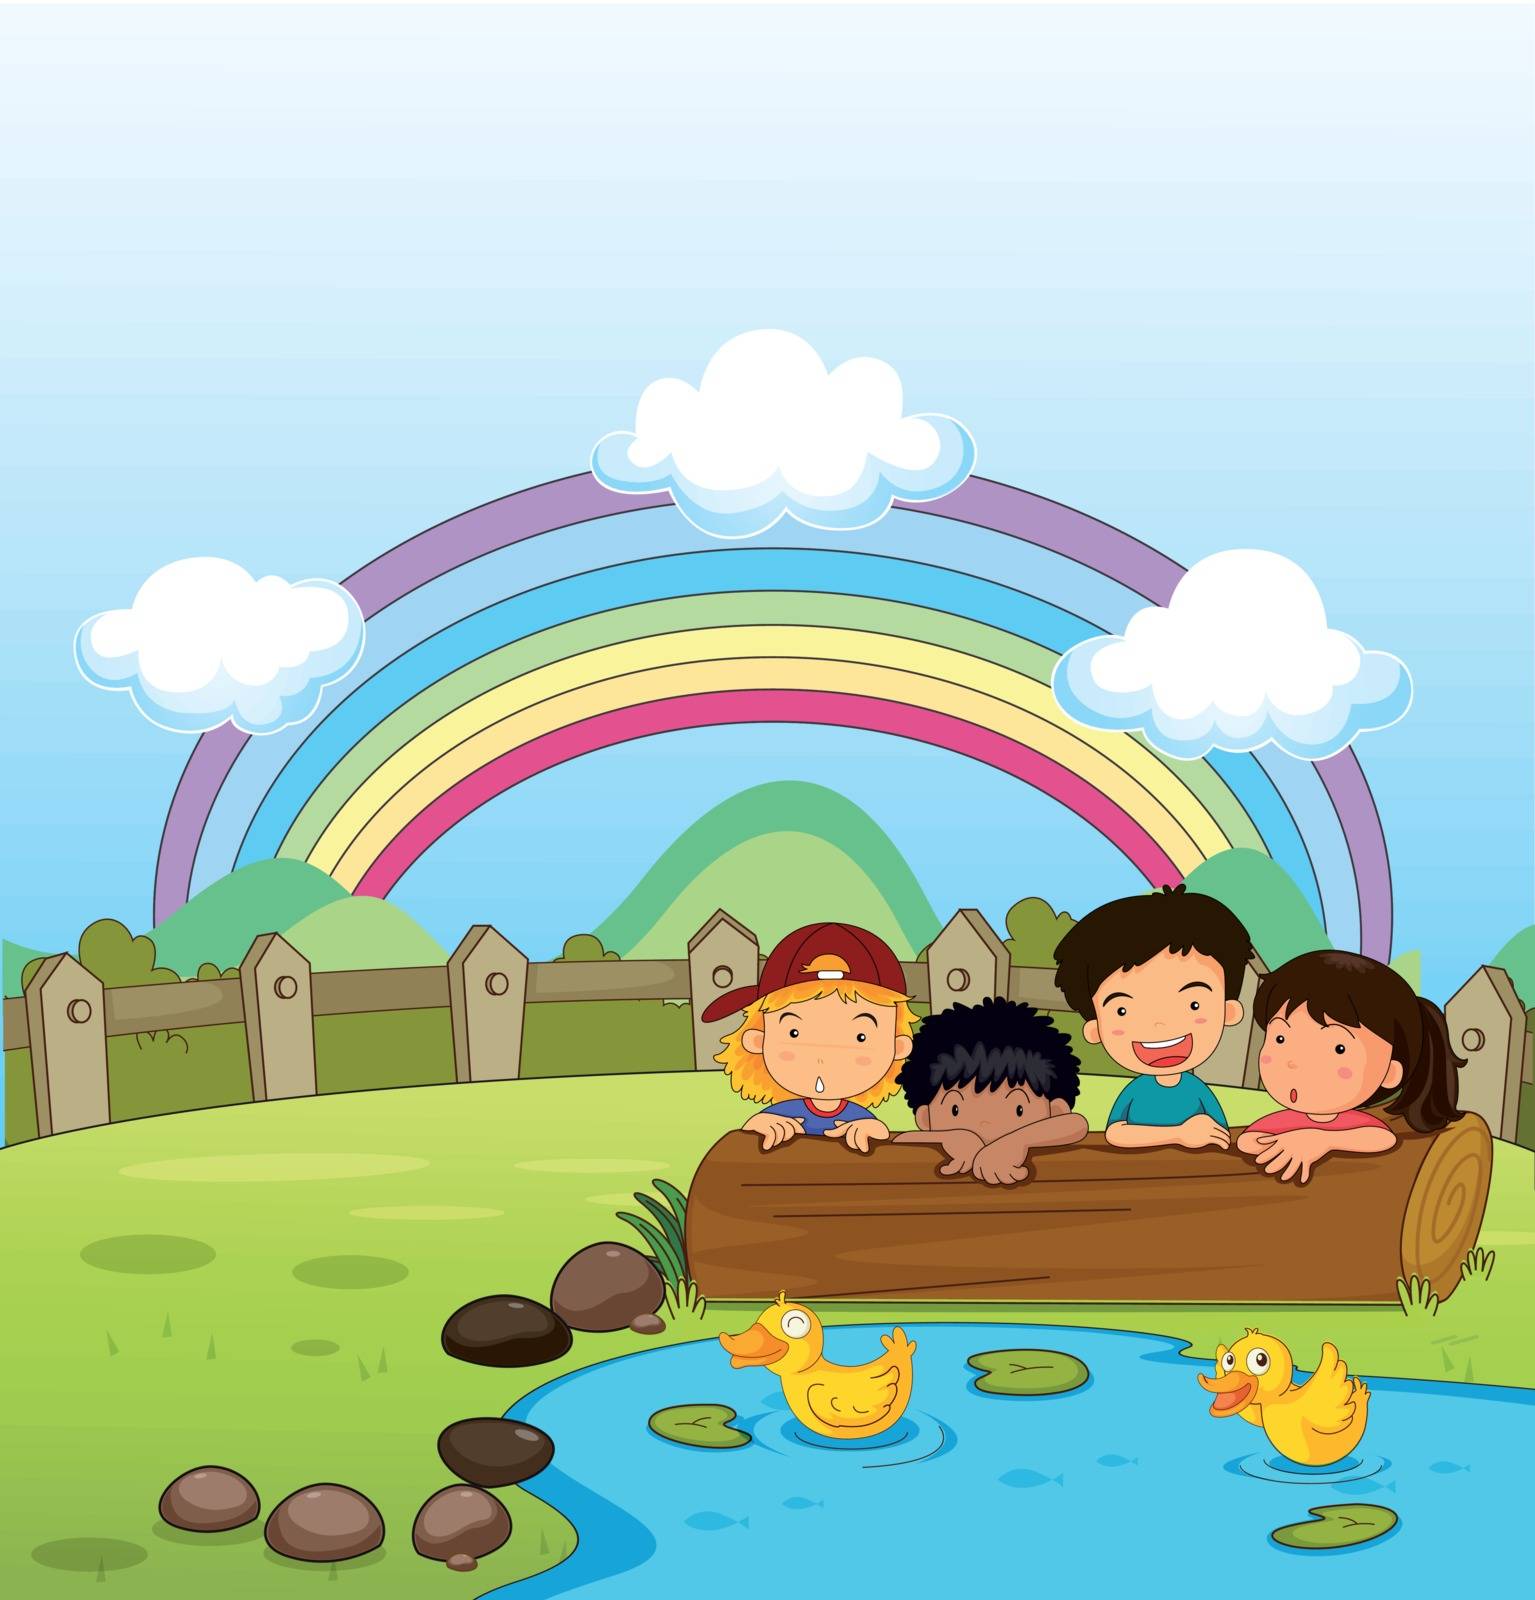 Illustration of kids watching the ducklings in the pond